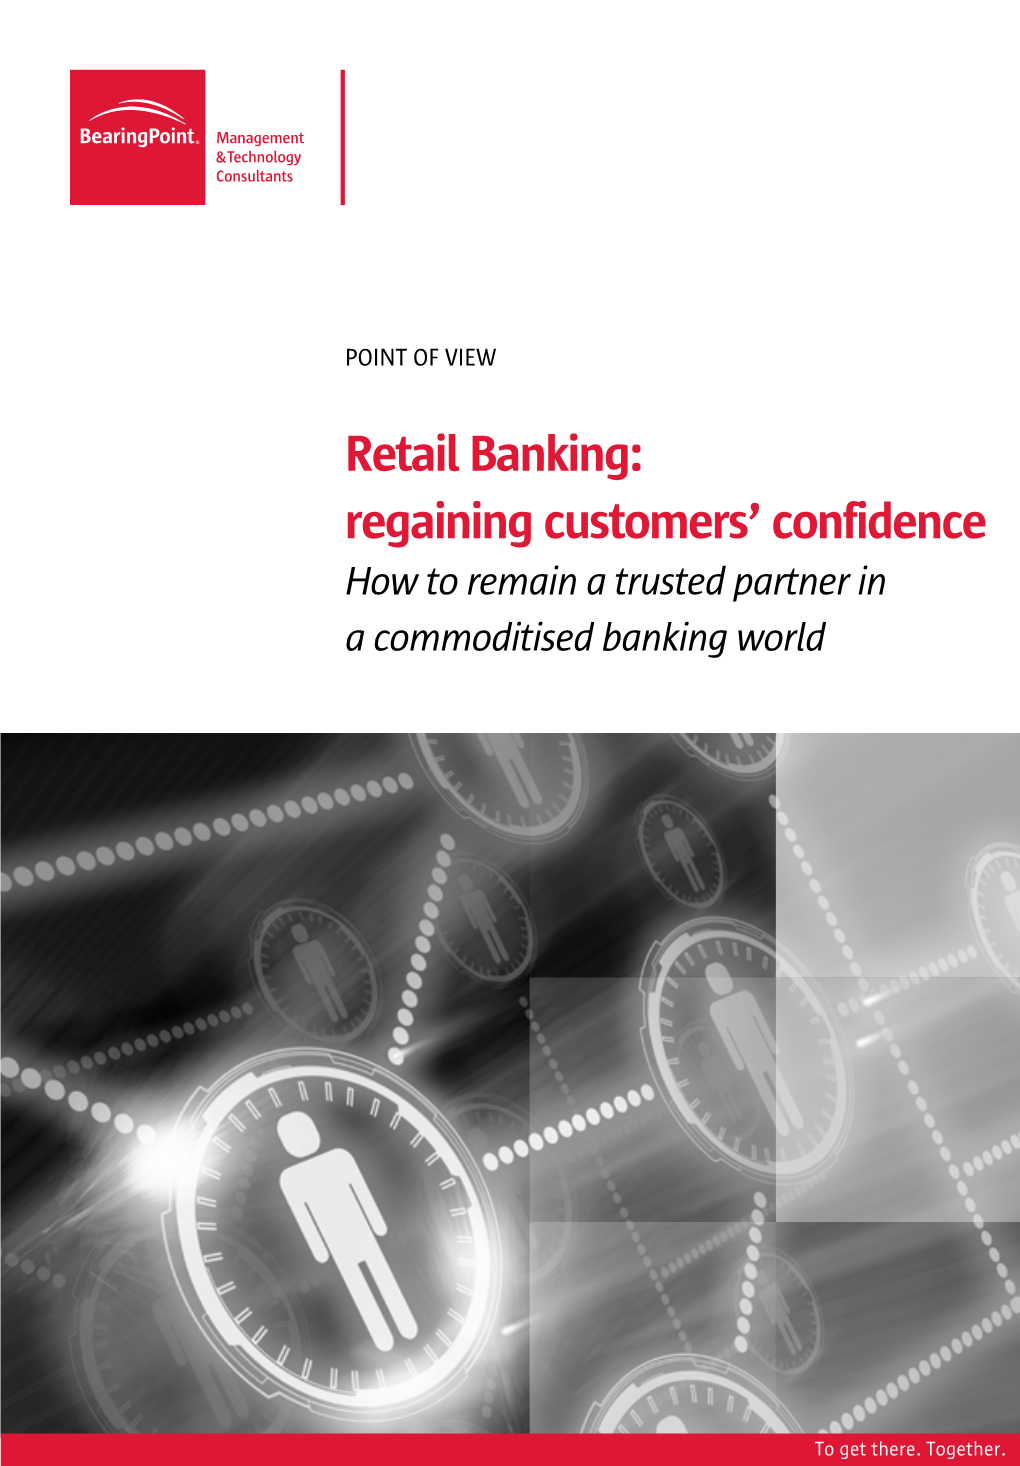 Retail Banking: Regaining Customers’ Confidence How to Remain a Trusted Partner in a Commoditised Banking World